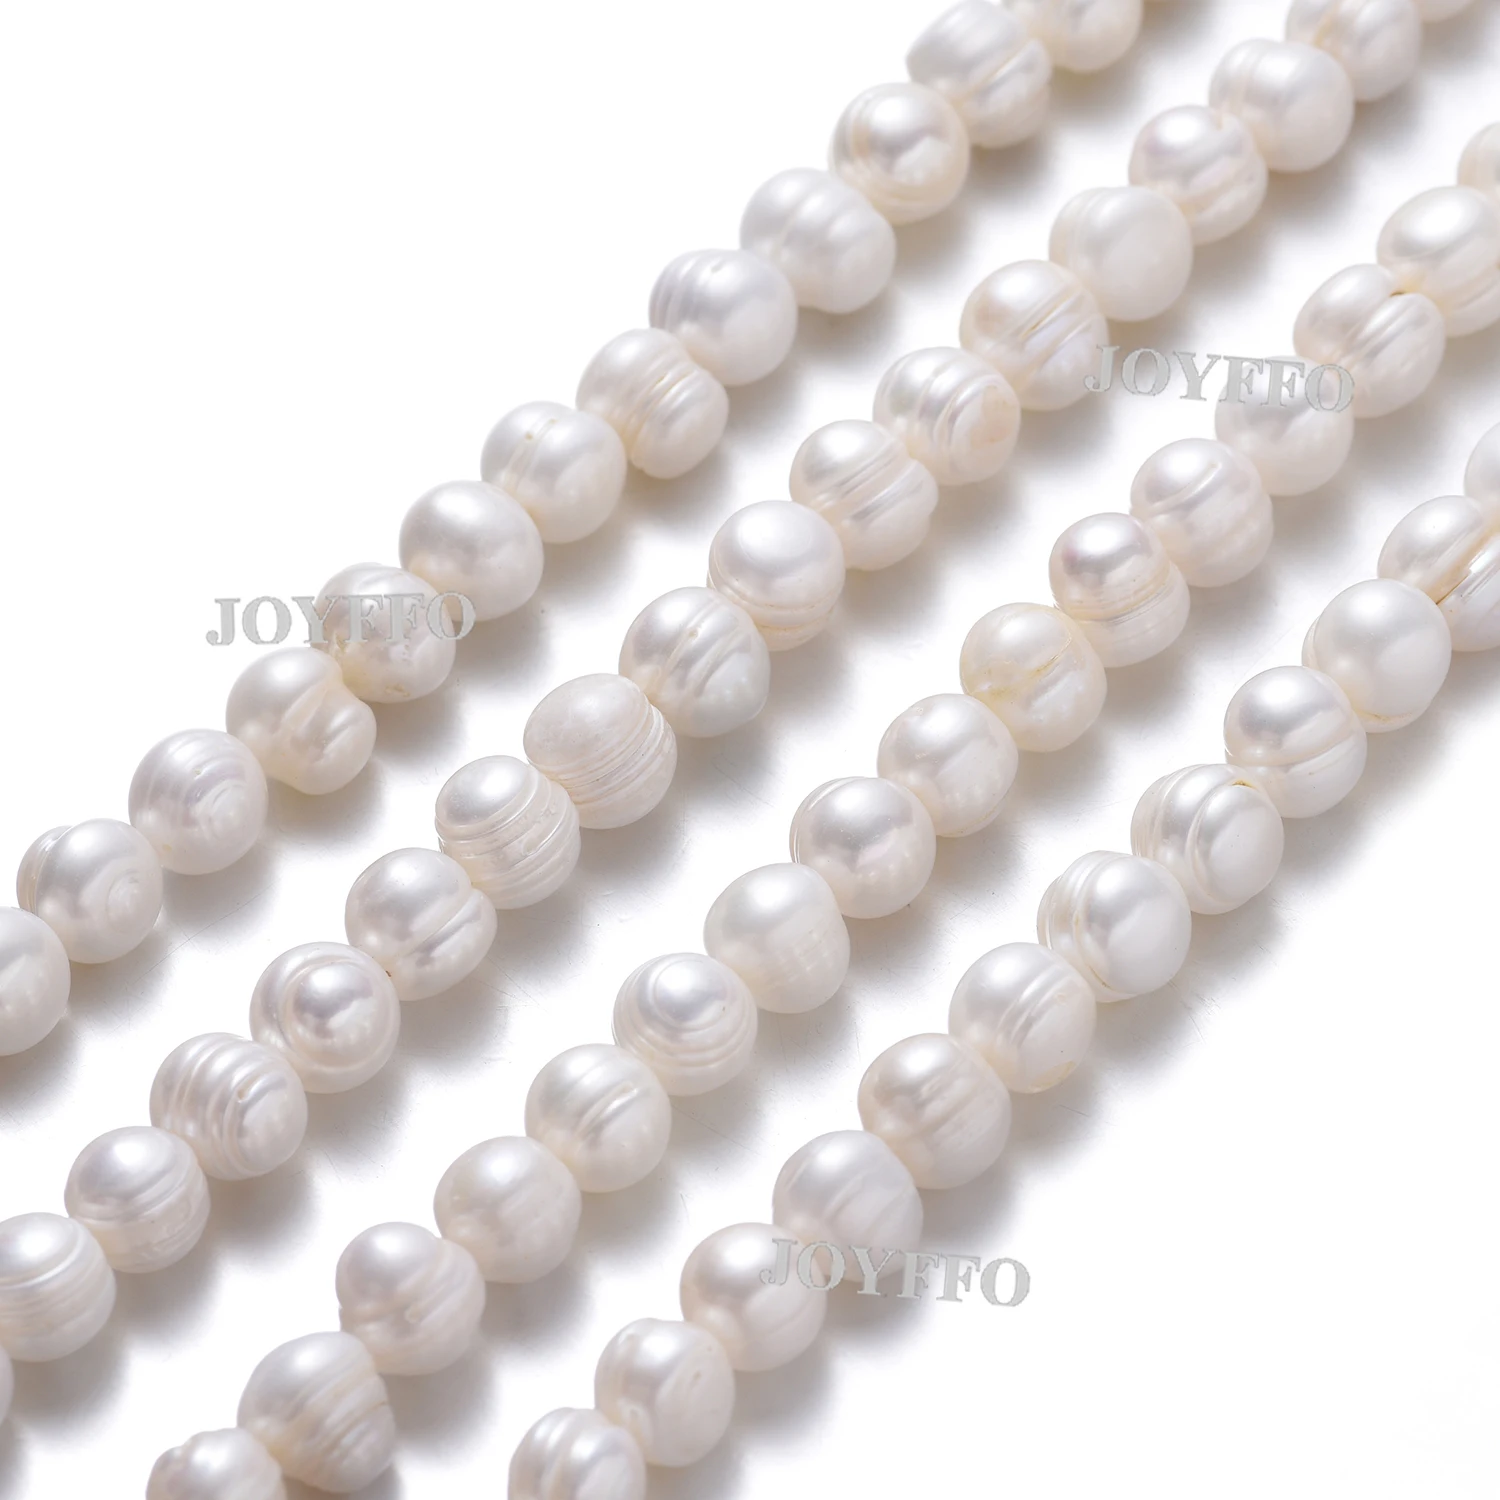 

11mm 12mm Hot Sale Round Pearls Beads Jewelry Making Bracelets White Natural Freshwater Loose Pearls For Jewelry Findings